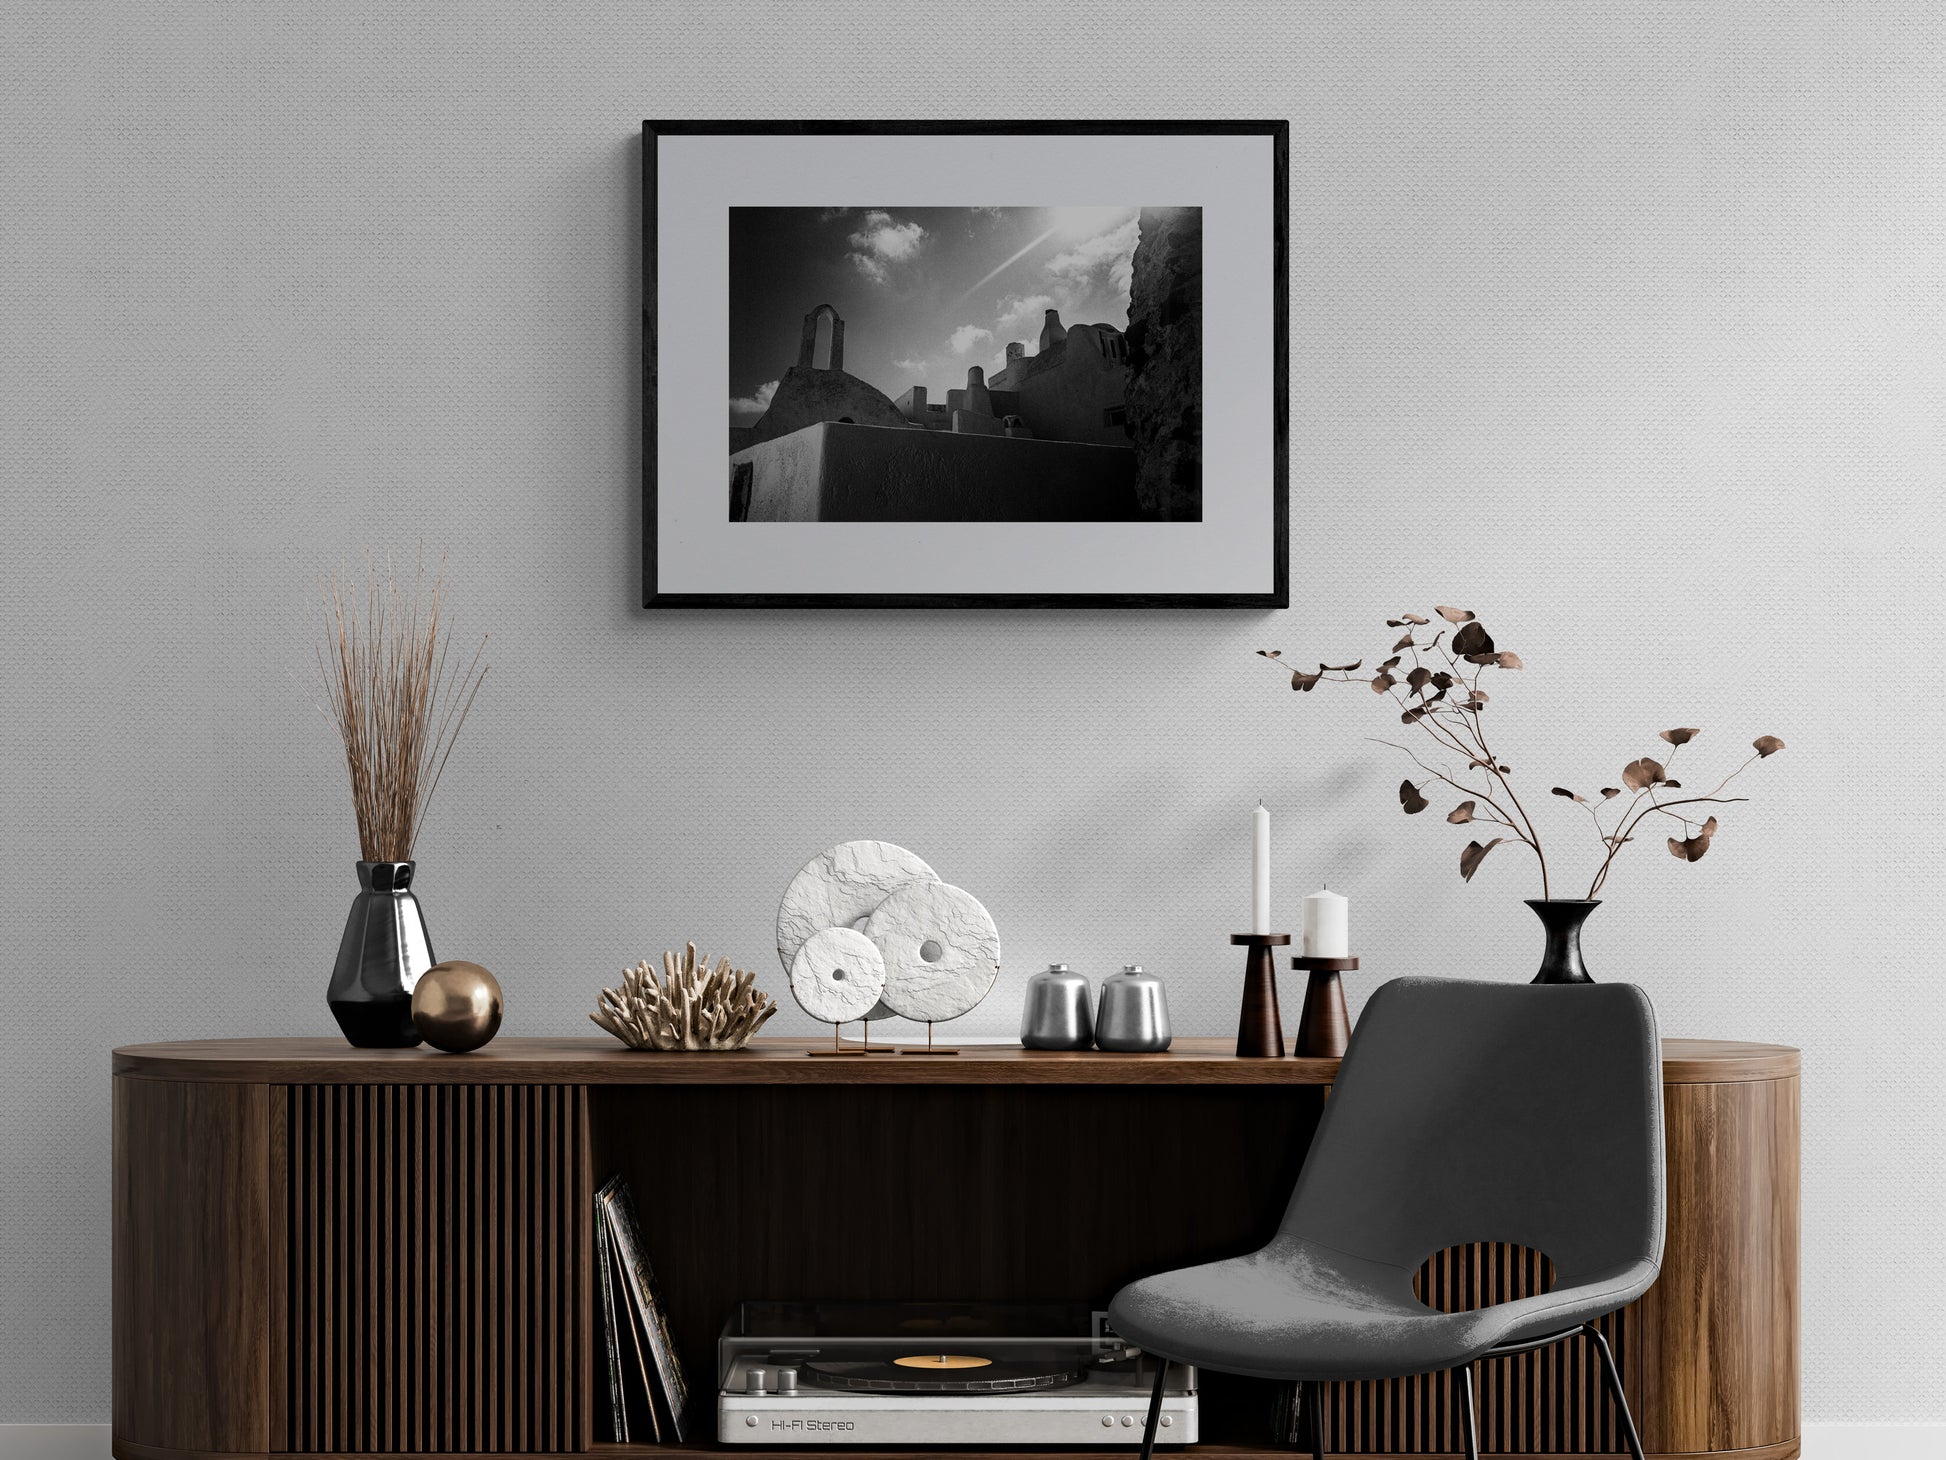 Silhouettes and Forms | Santorini | Chorōs | Black-and-white wall art photography from Greece